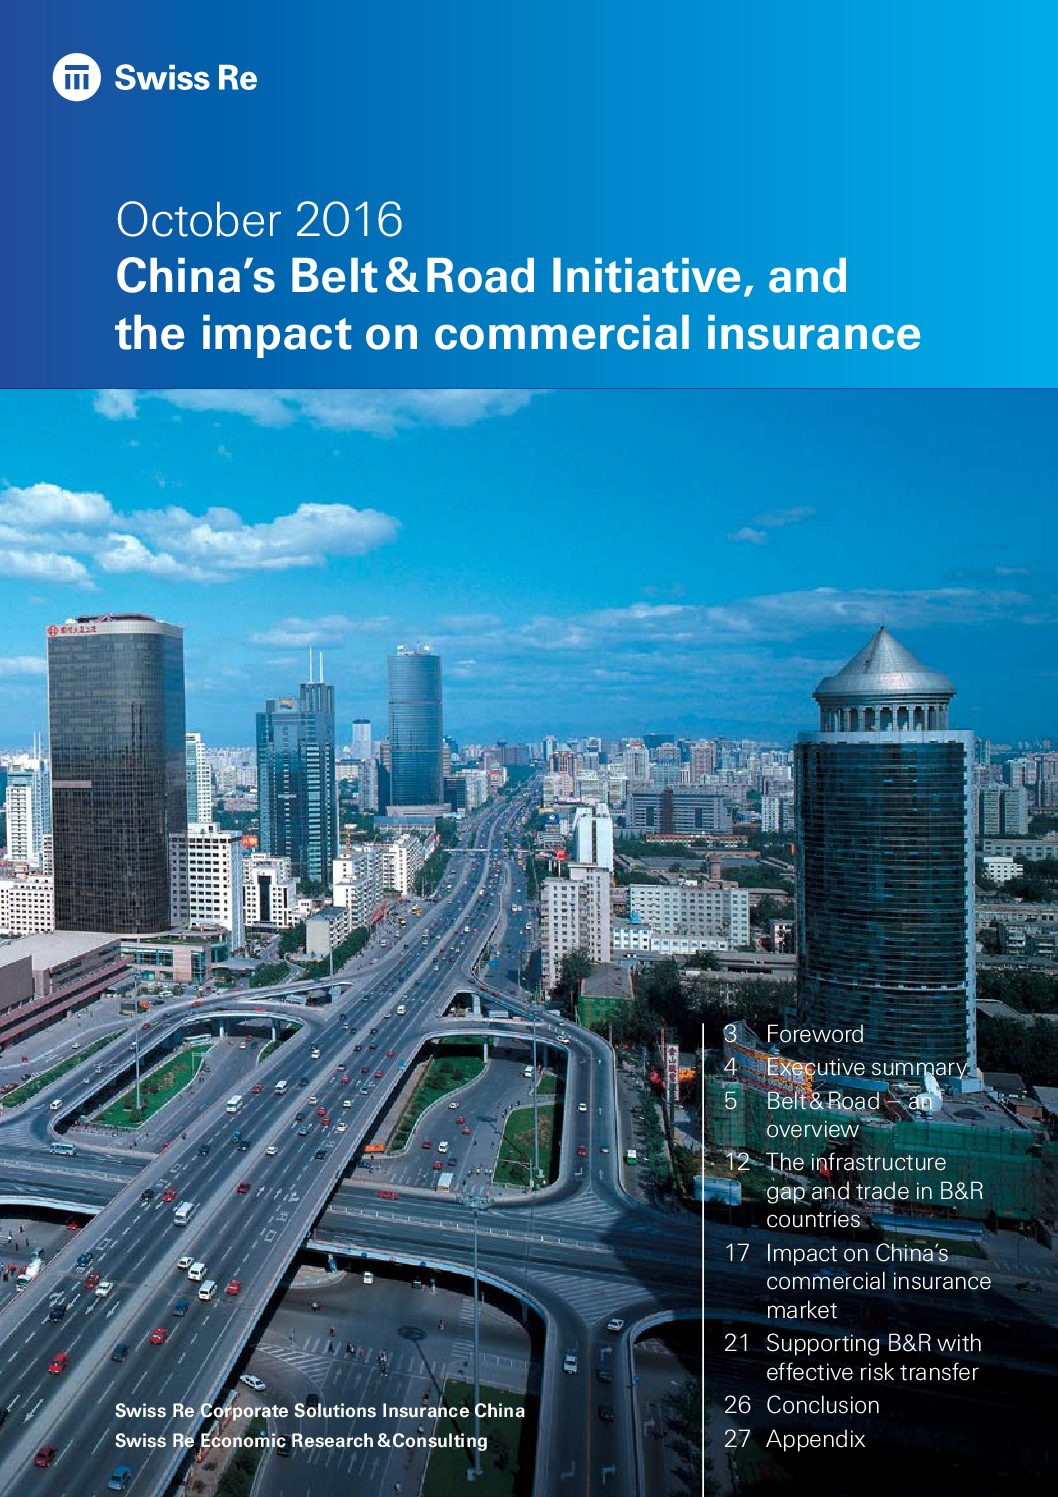 China’s Belt & Road Initiative: the impact on commercial insurance in participating regions